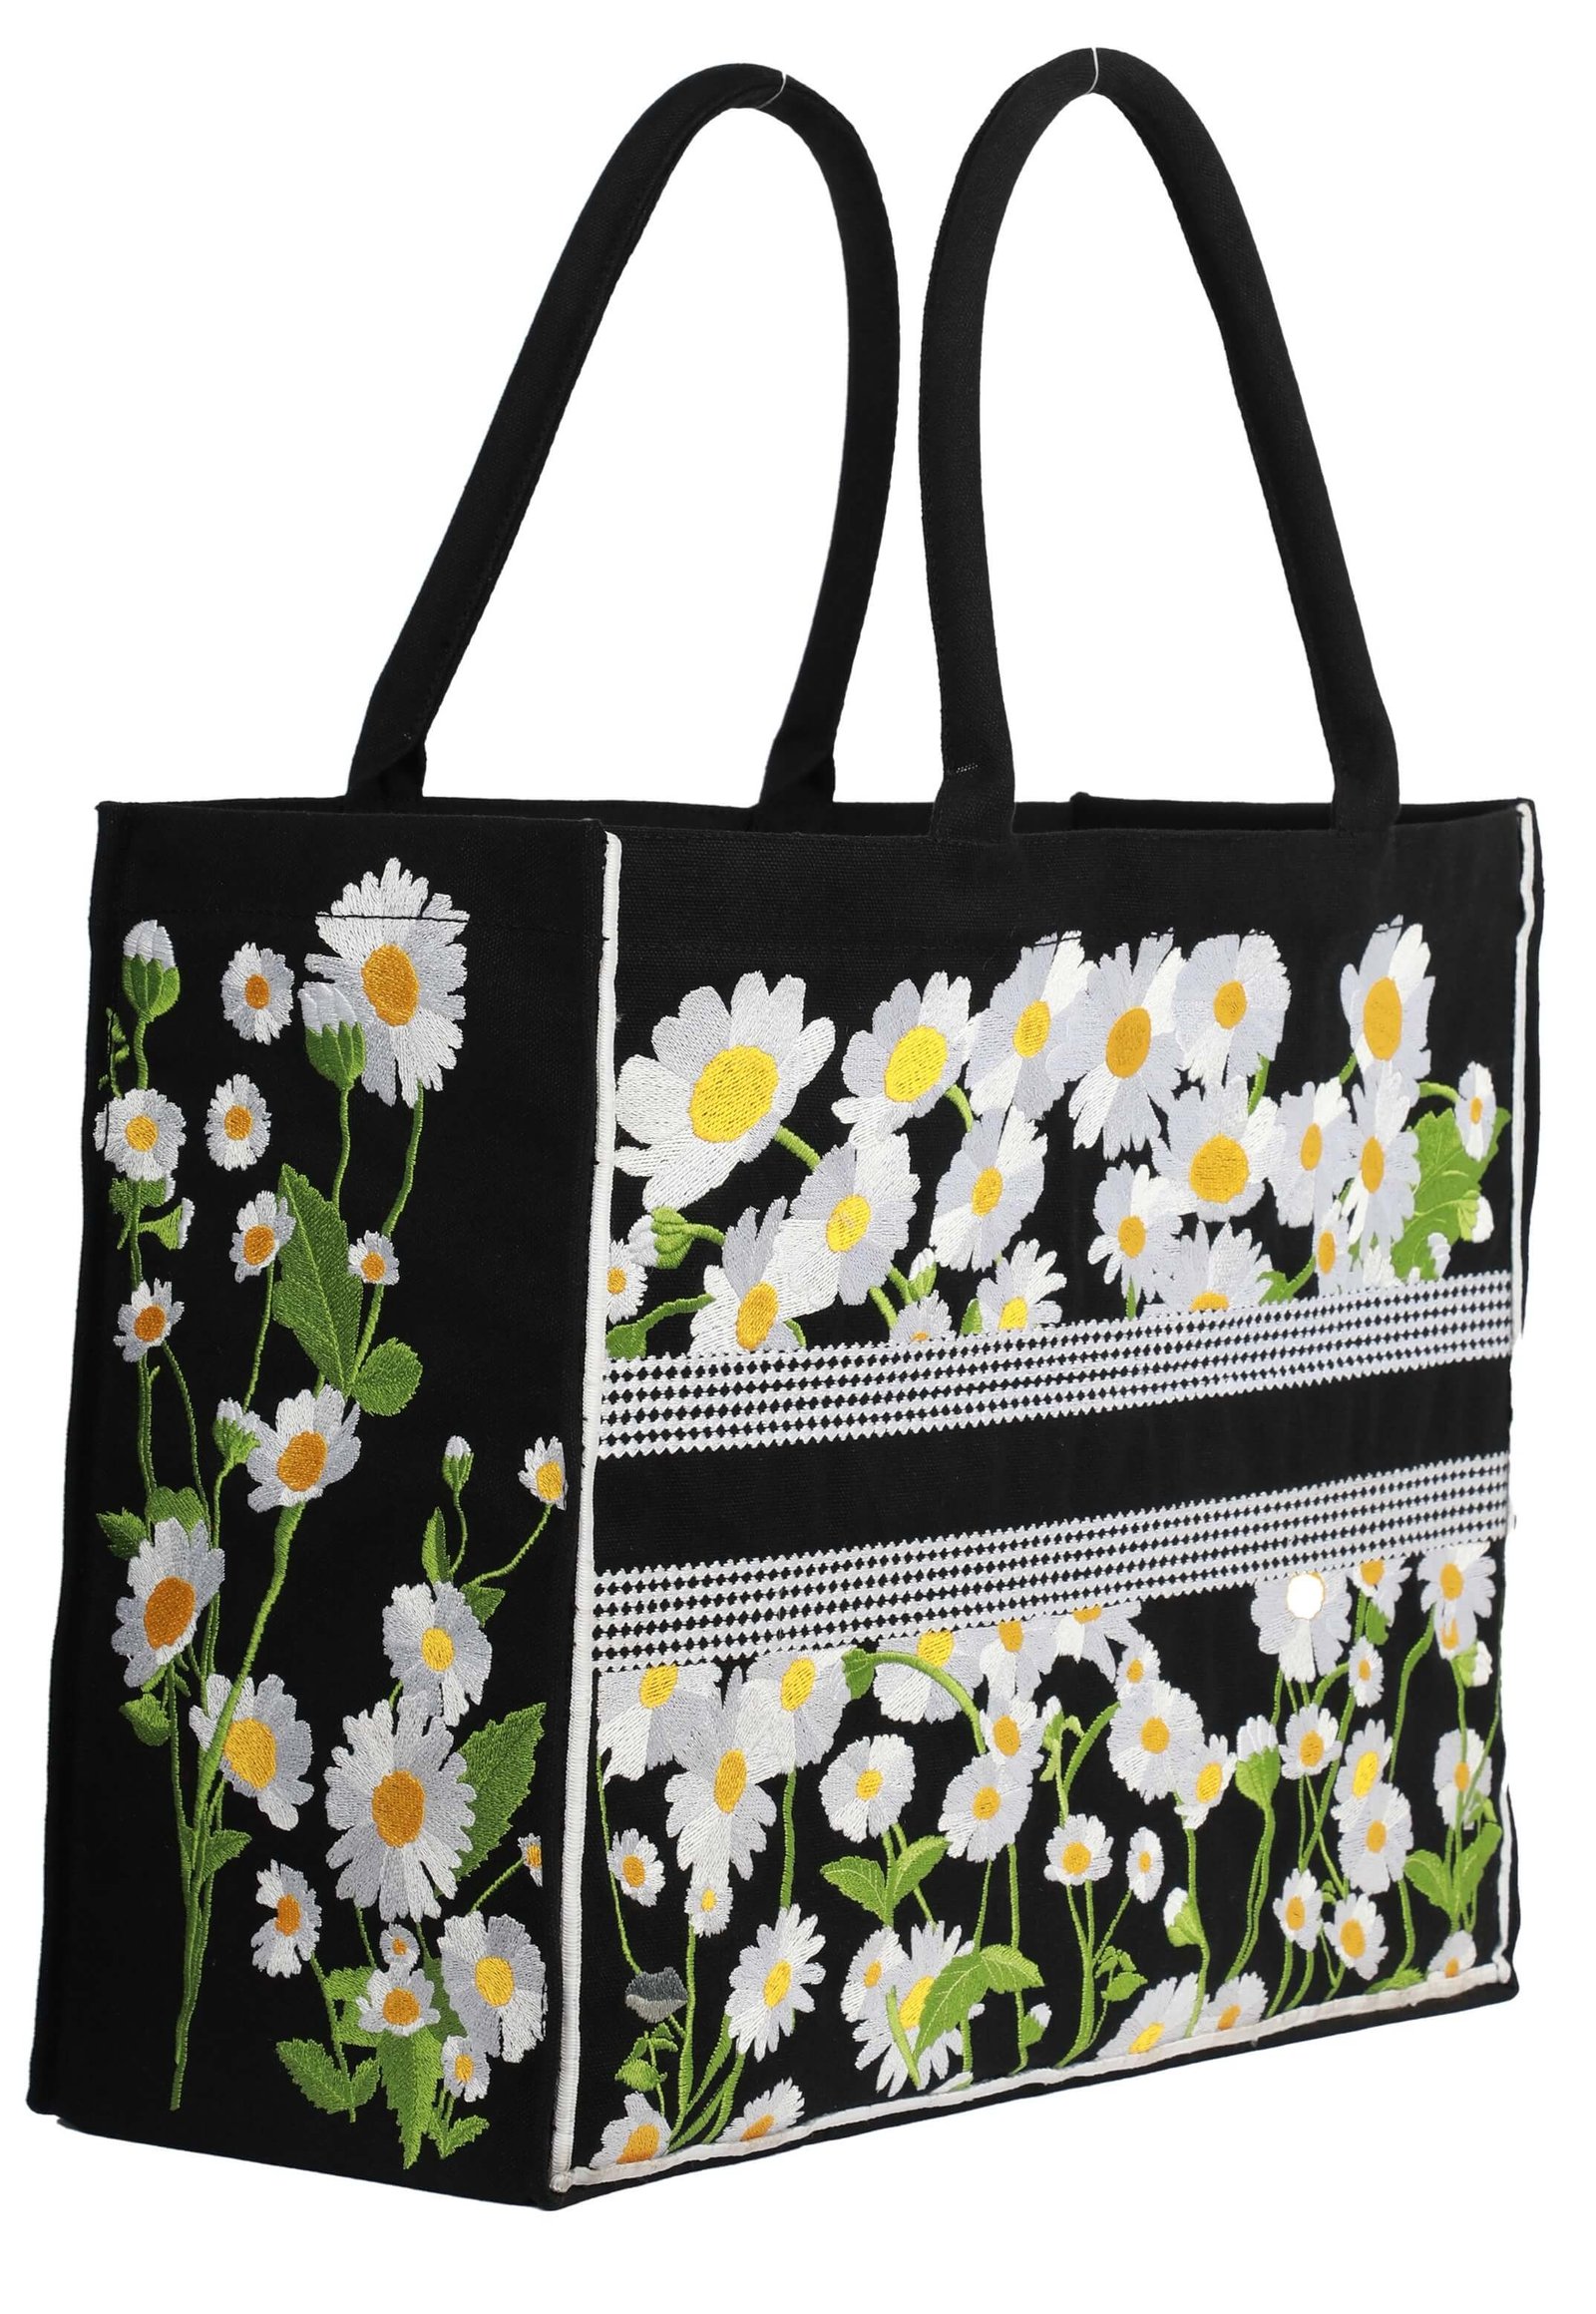 Daisy Embroidered Vegan Tote Bag (Limited)